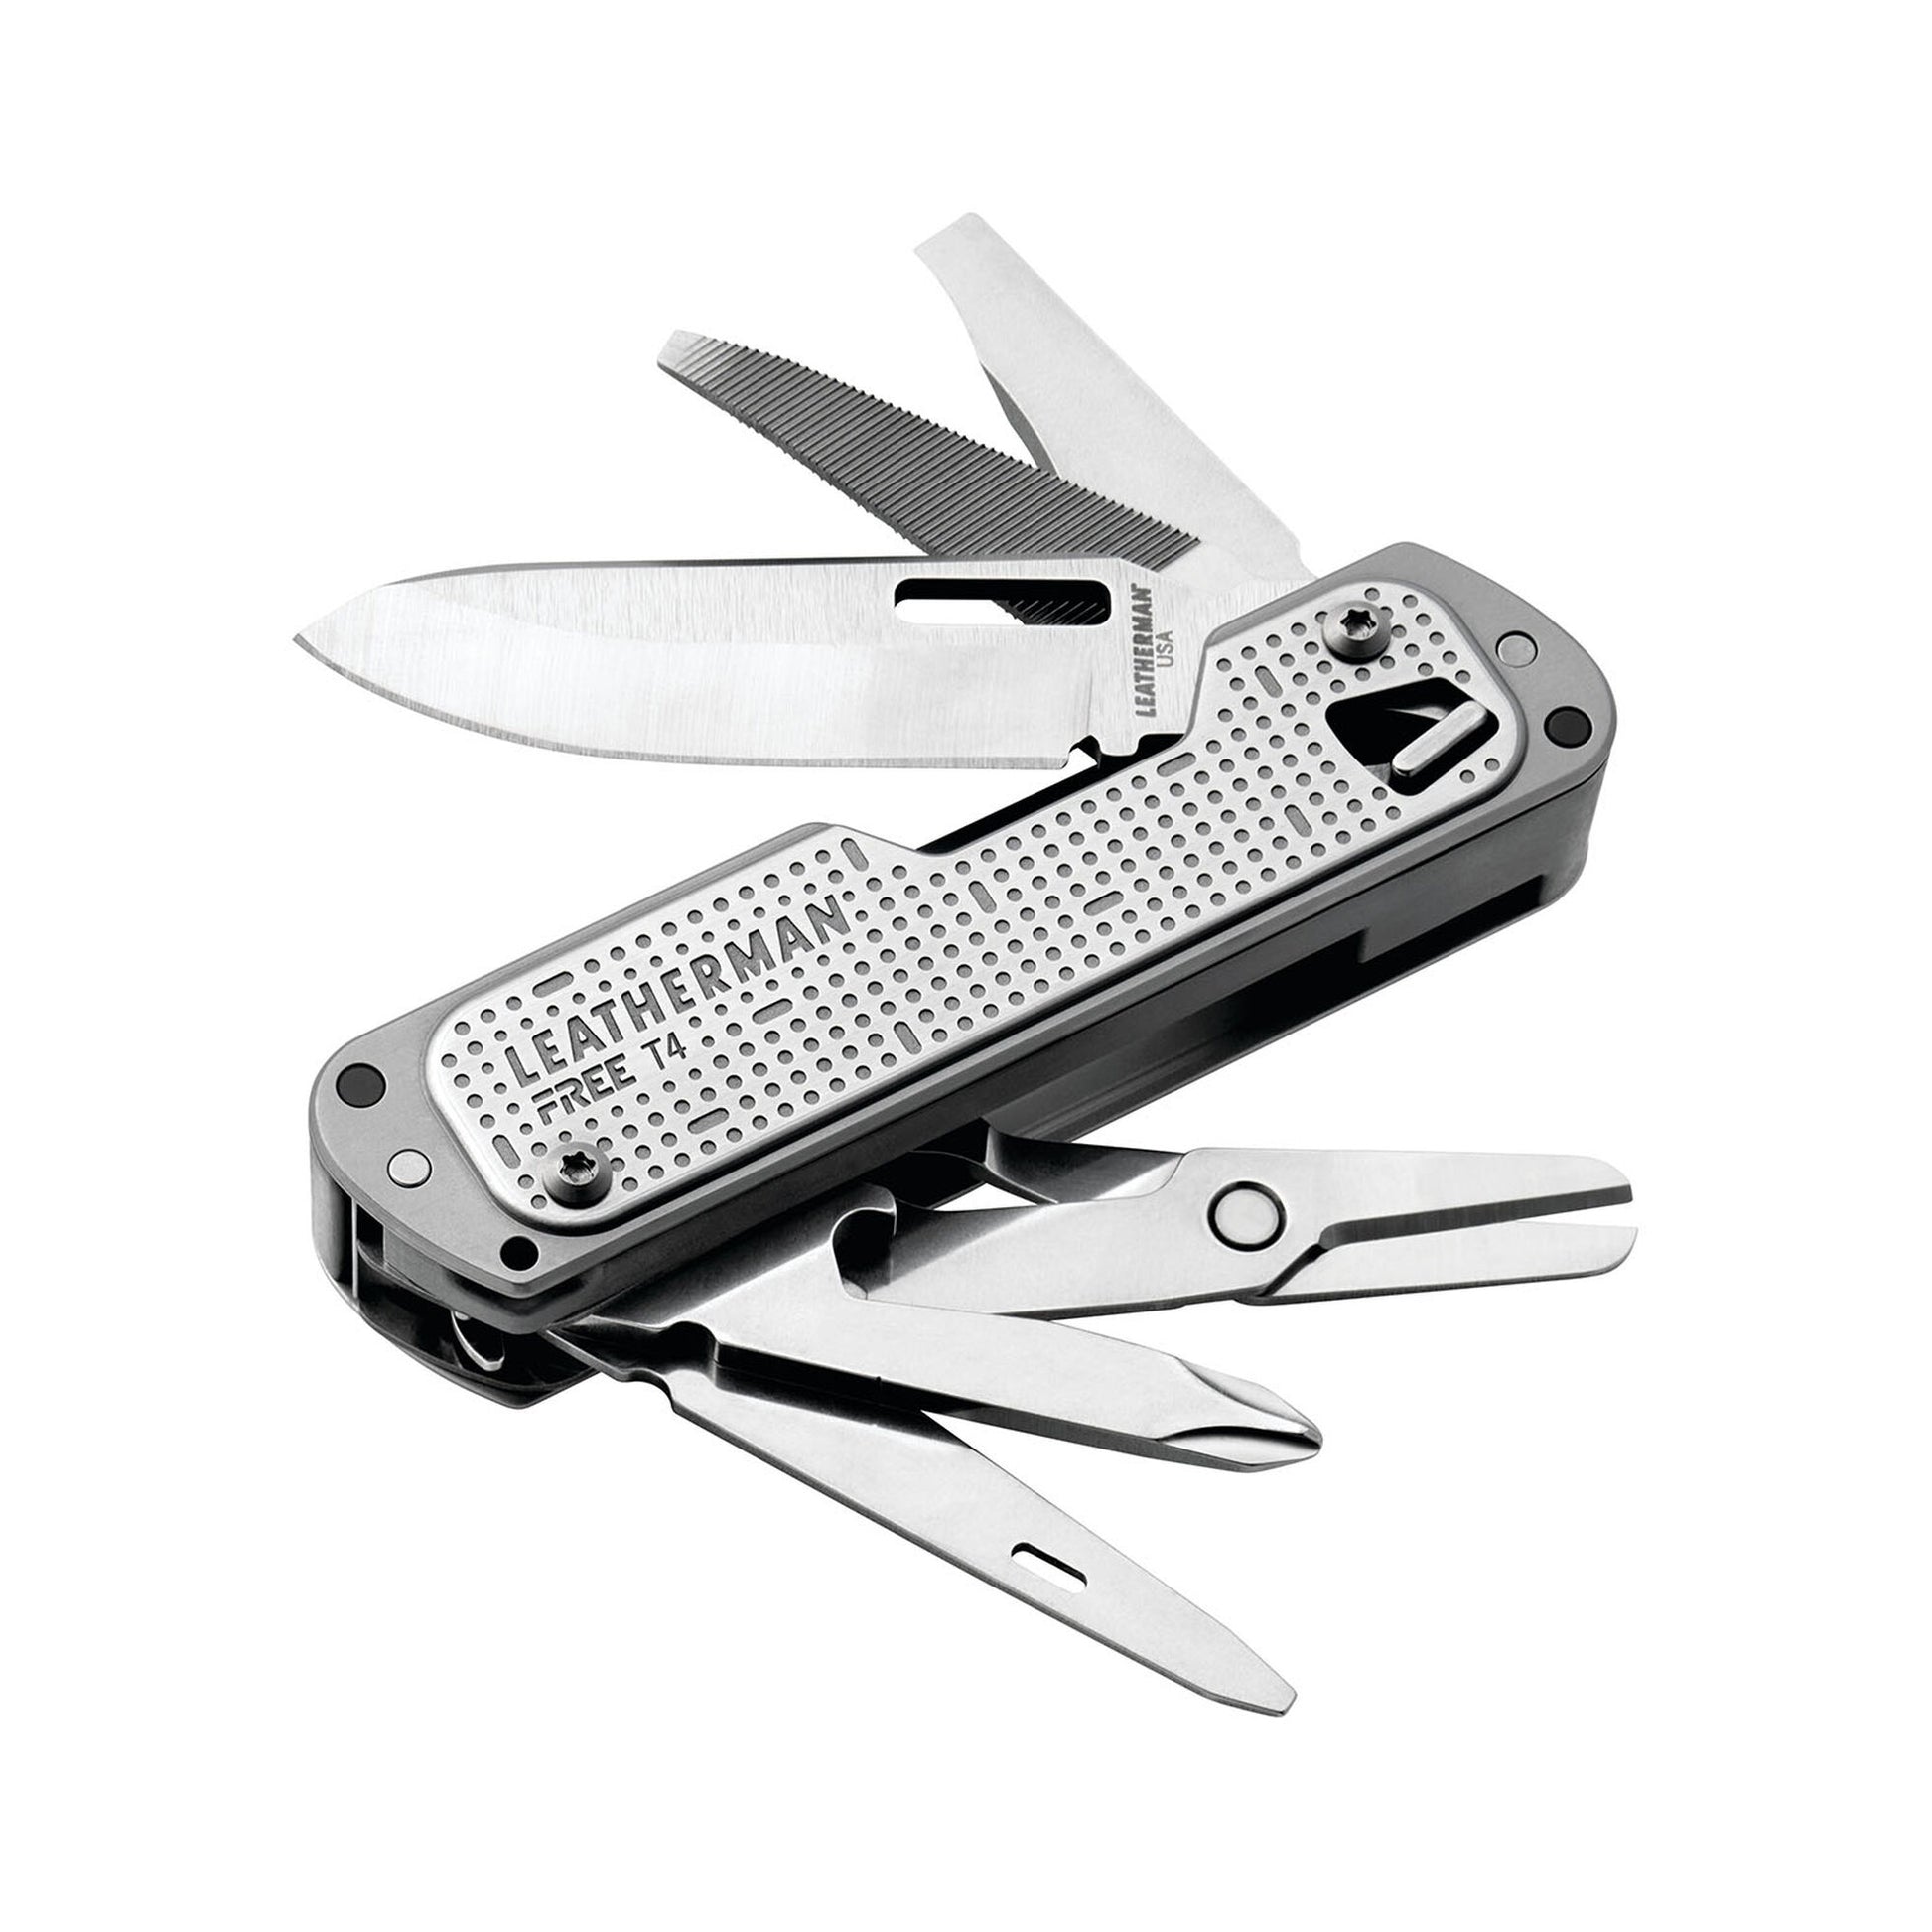 Pince Leatherman multifonctions Free T4 (12 outils) - Leatherman-T.A DEFENSE